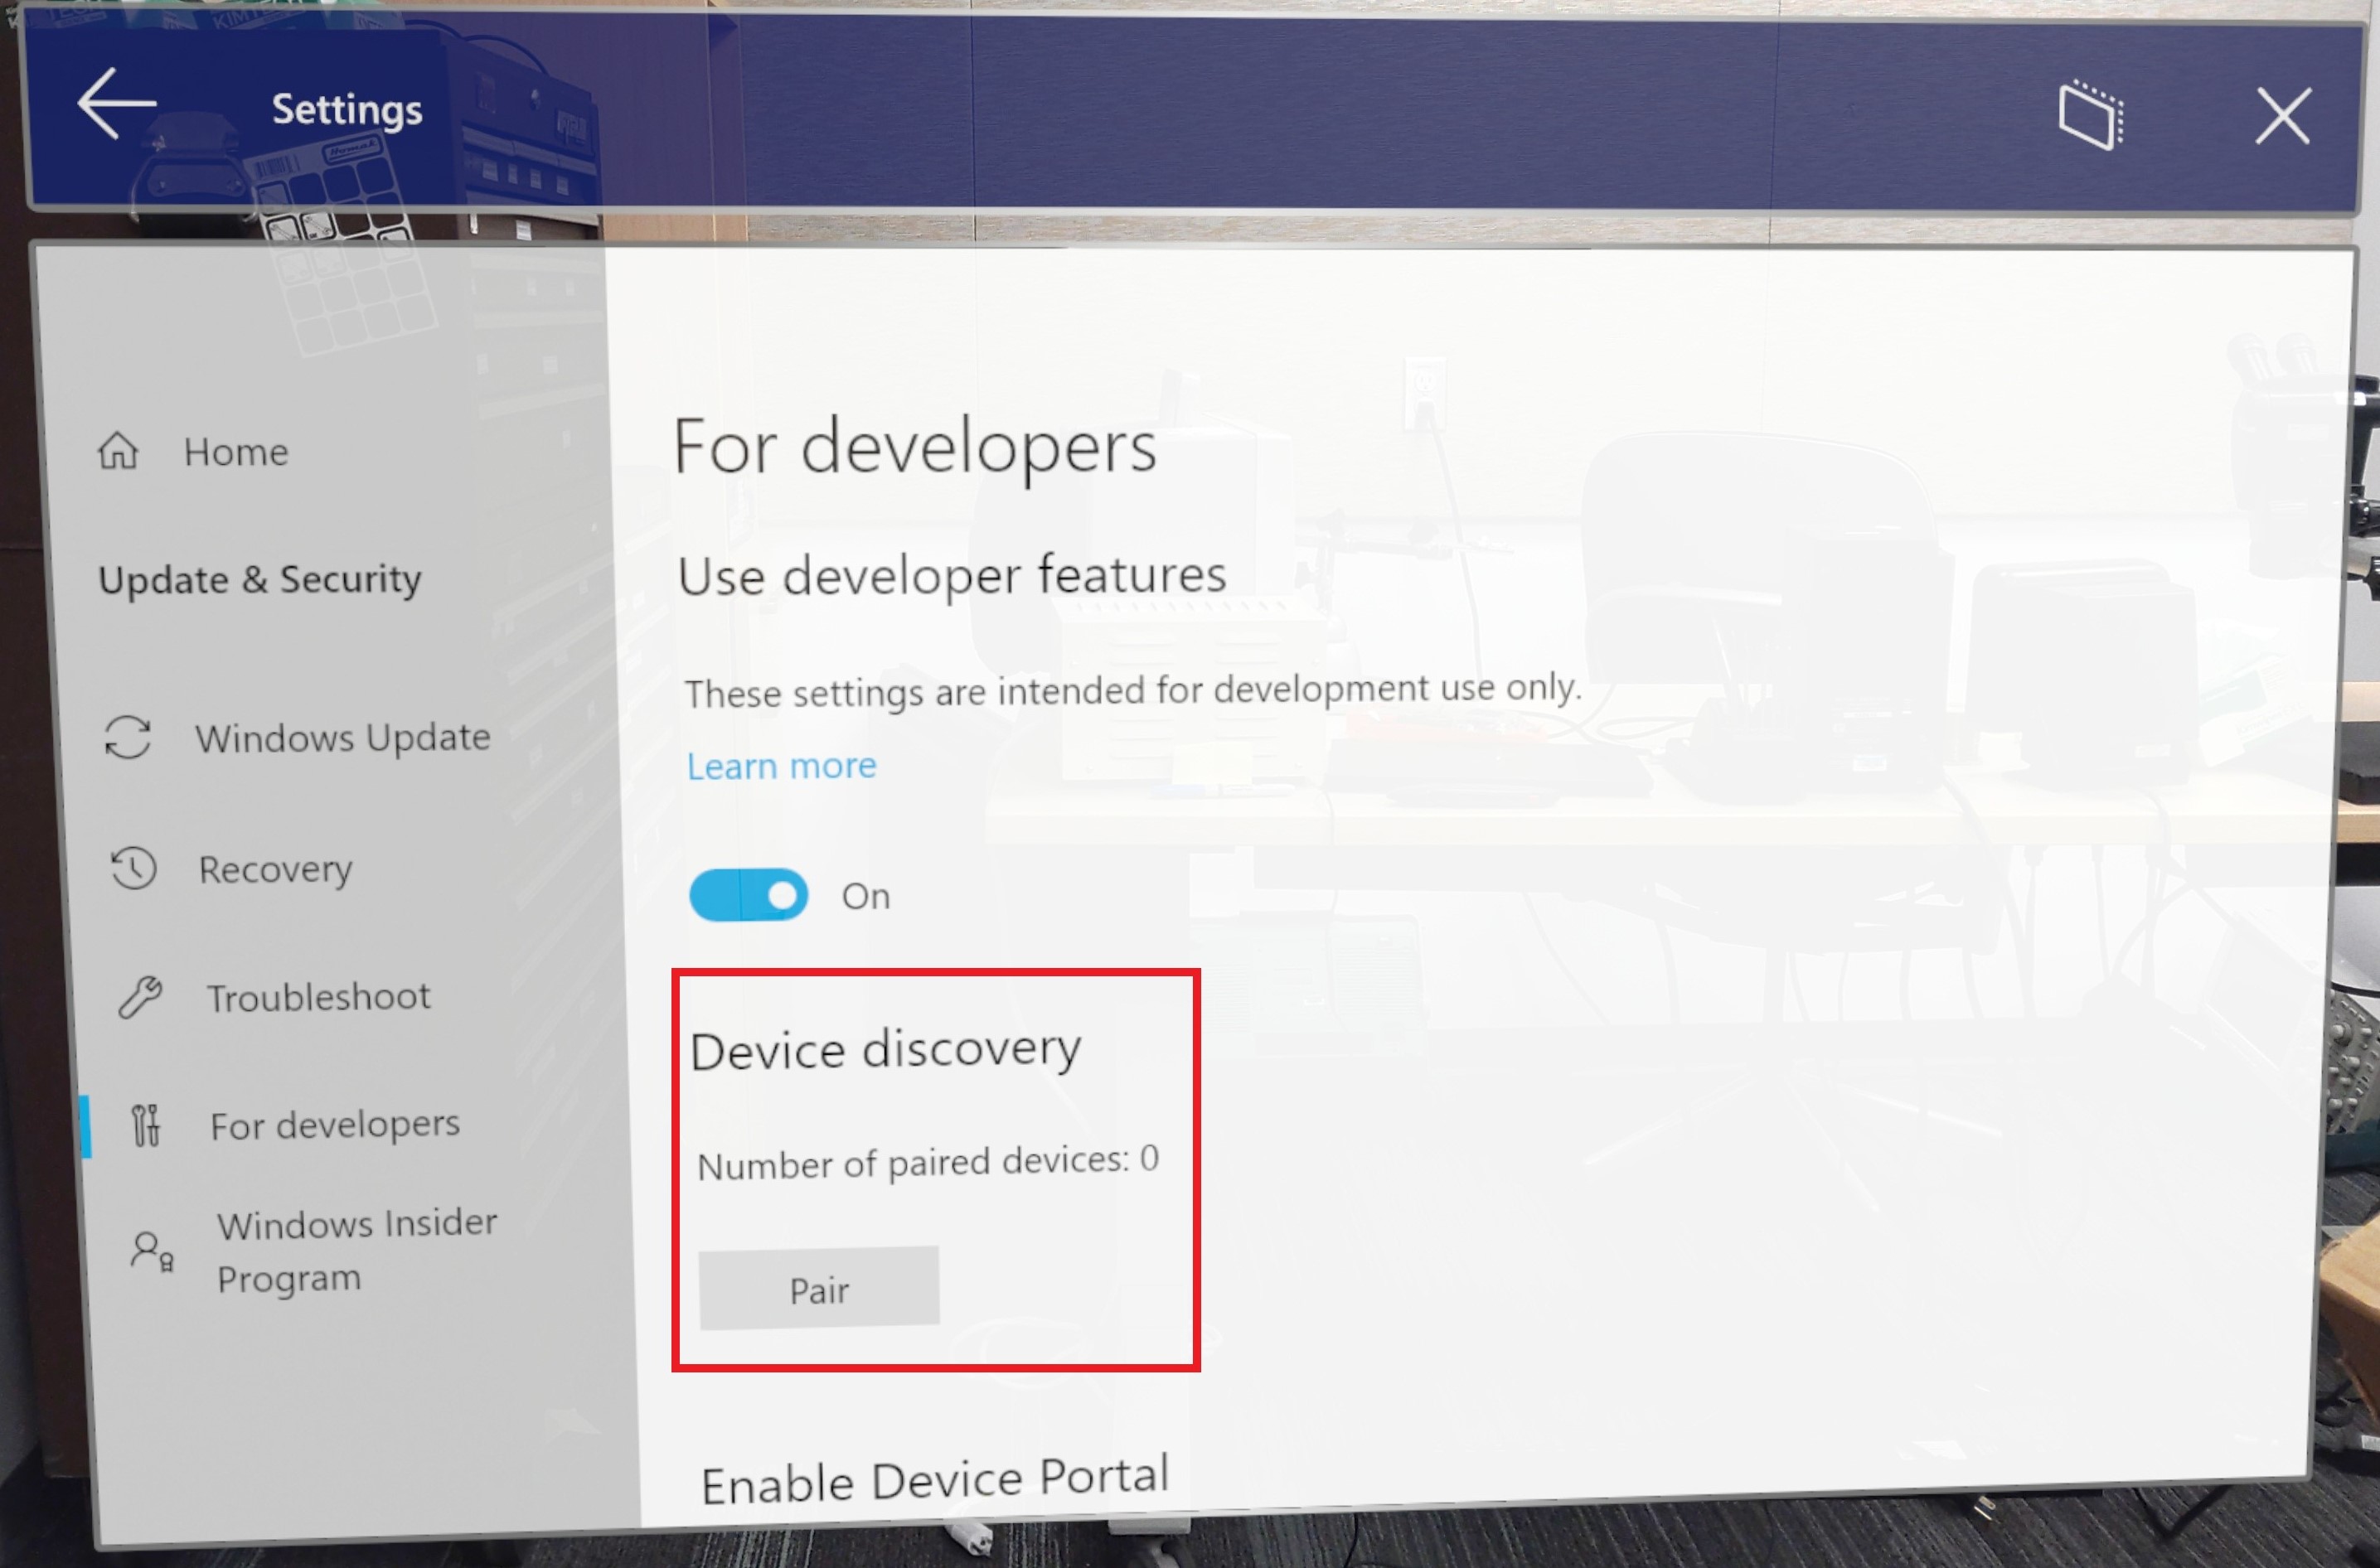 Screenshot of for developers window open in settings with device discovery highlighted